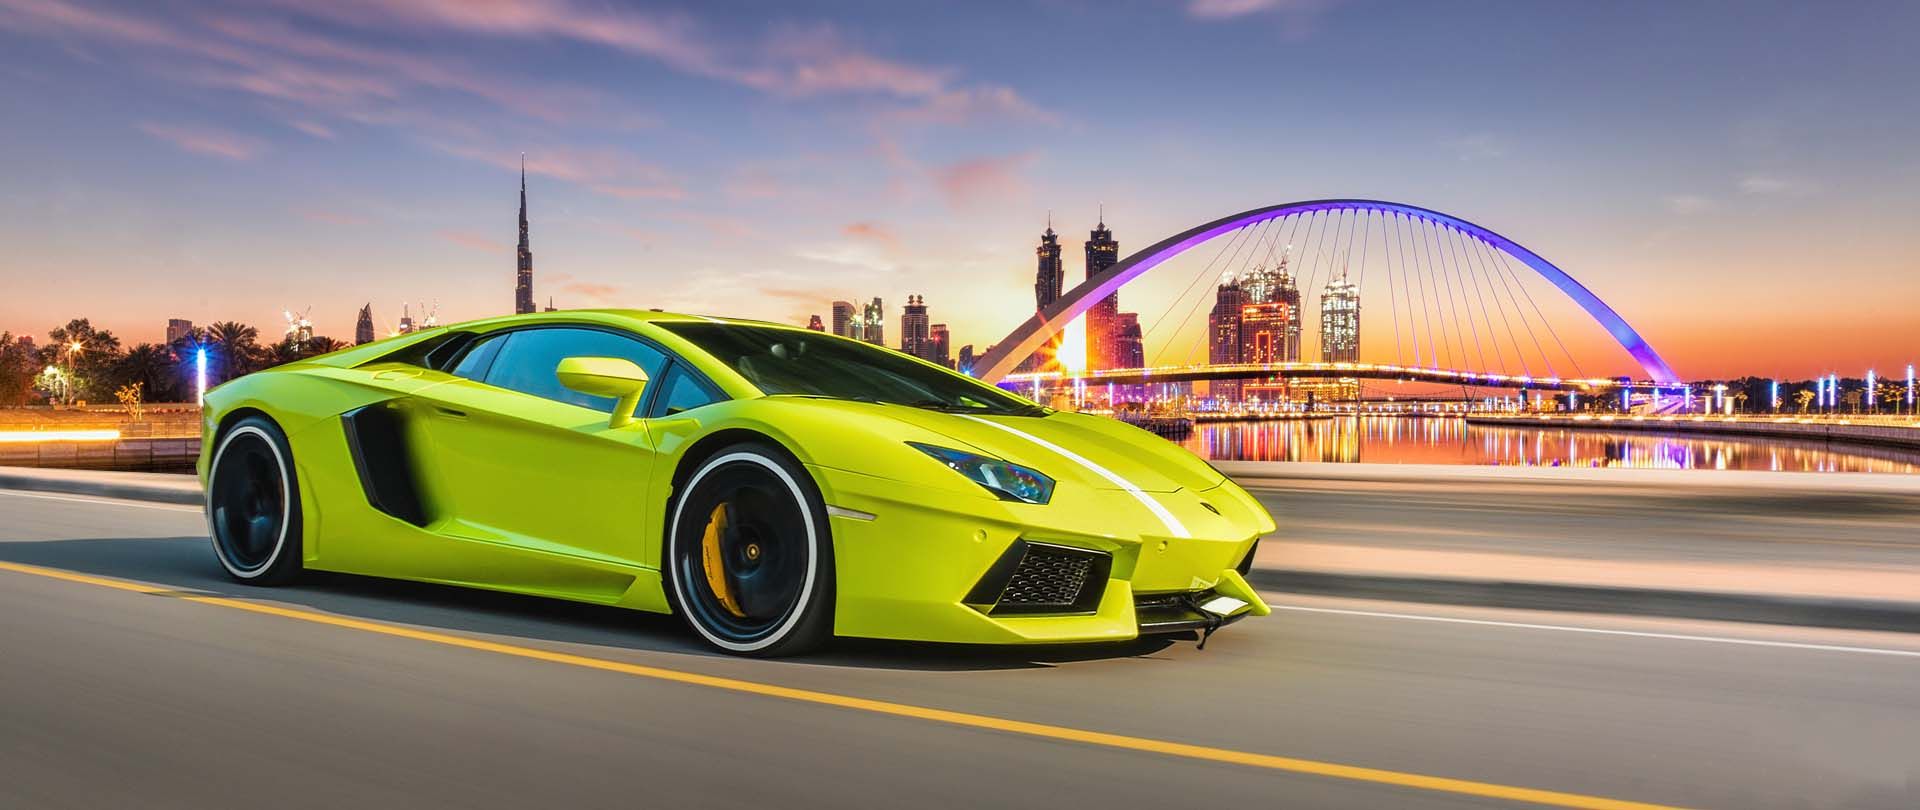 Hourly Car Rental in Dubai – Why Its Beneficial